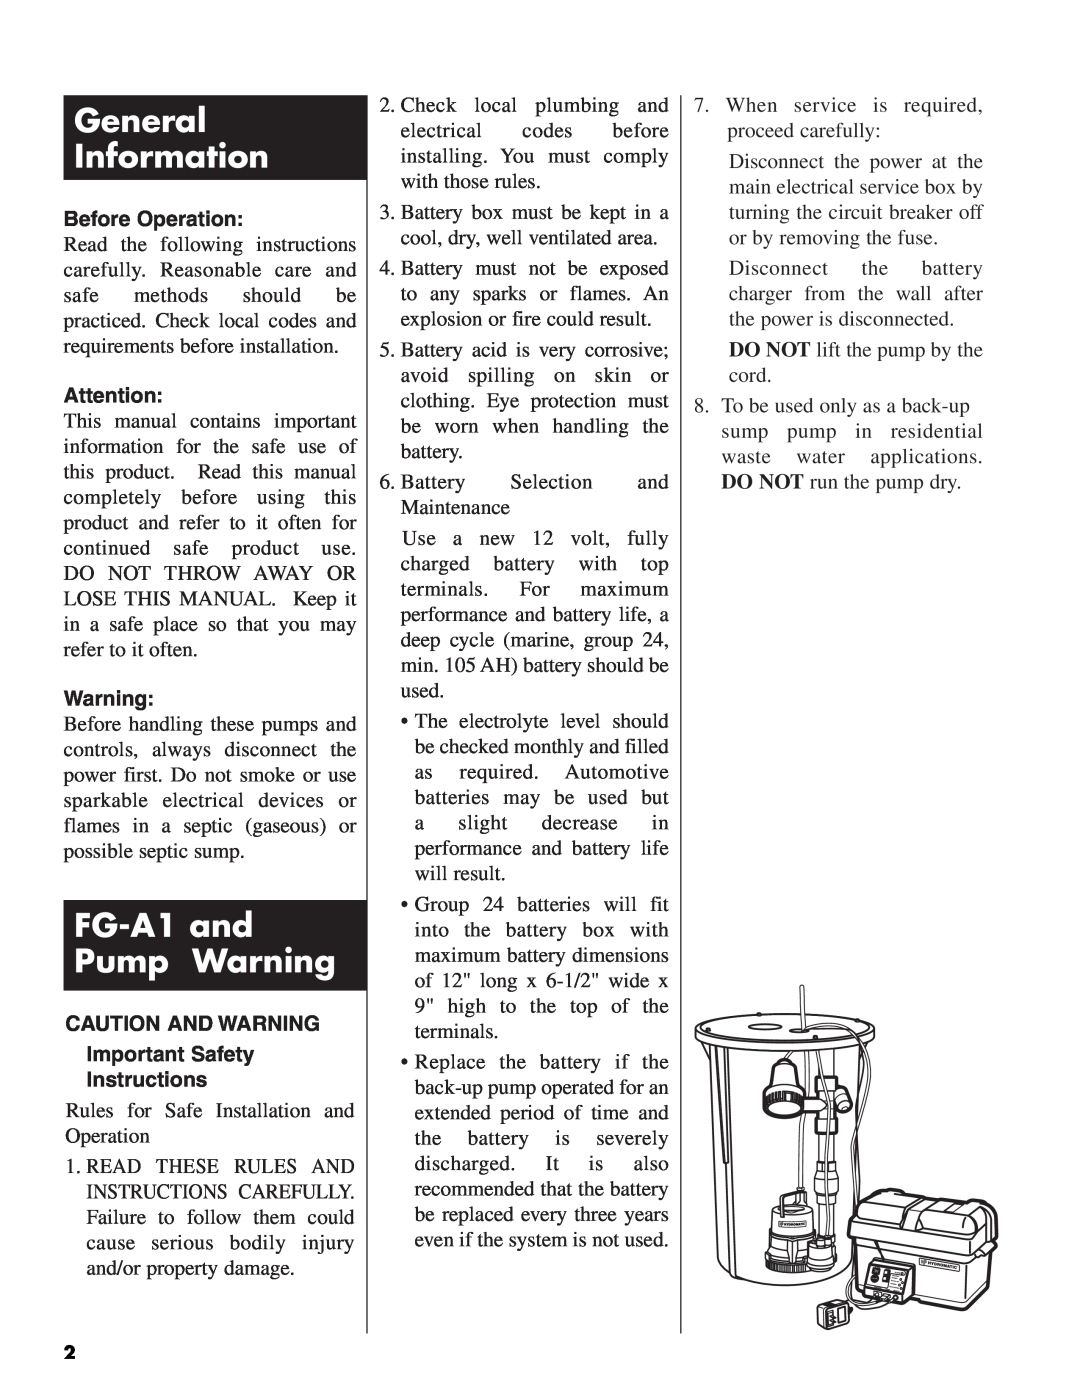 Pentair service manual General Information, FG-A1 and Pump Warning, Before Operation 